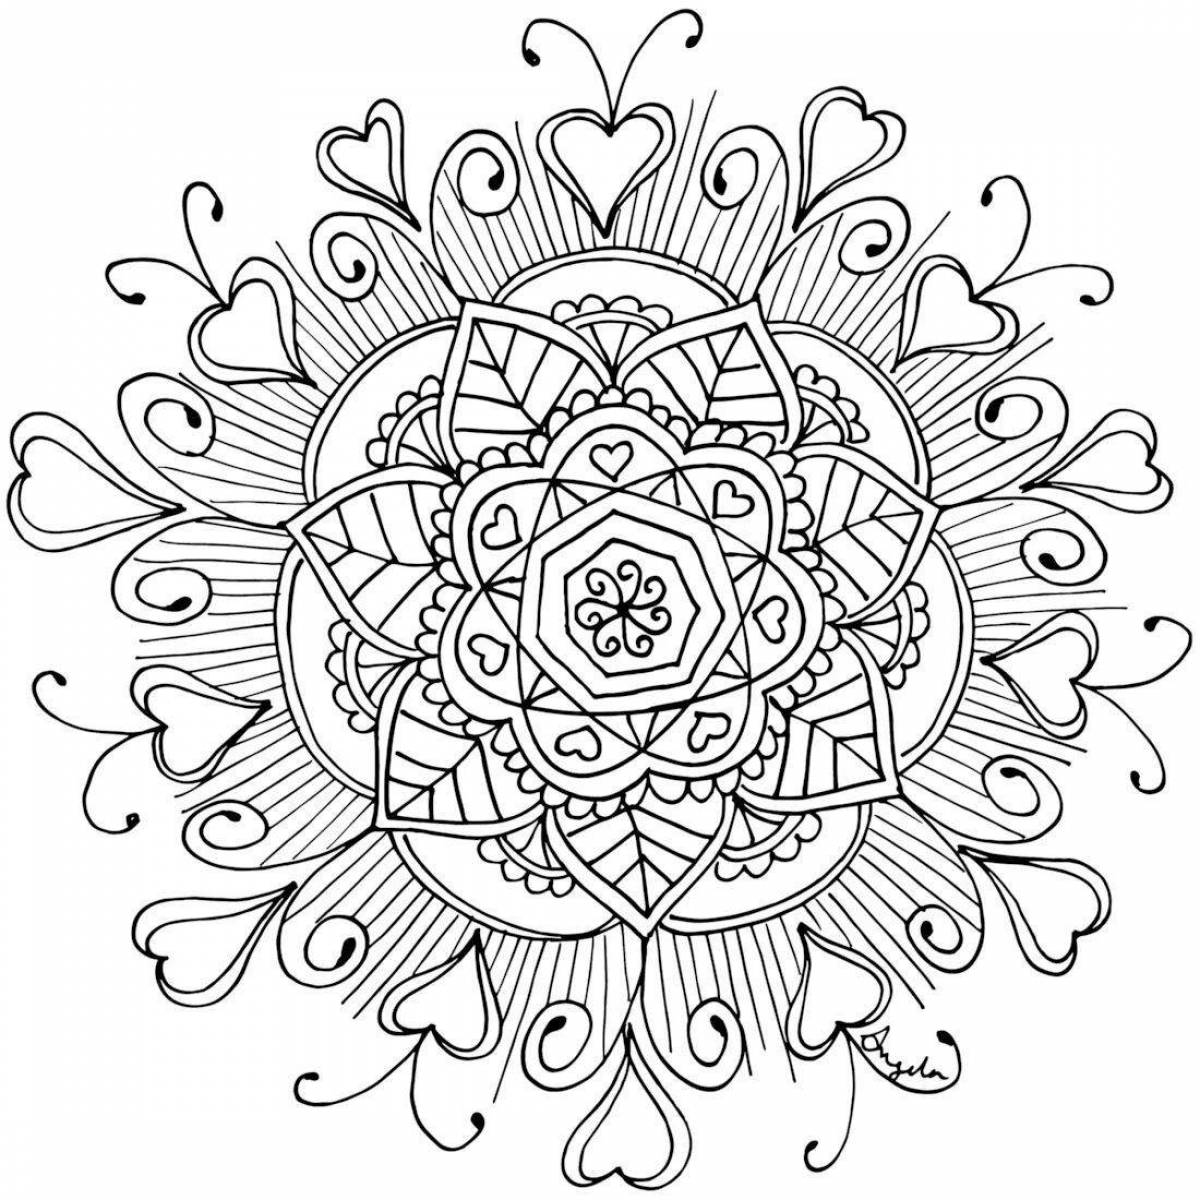 Exquisite anti-stress coloring video mysterious mandalas